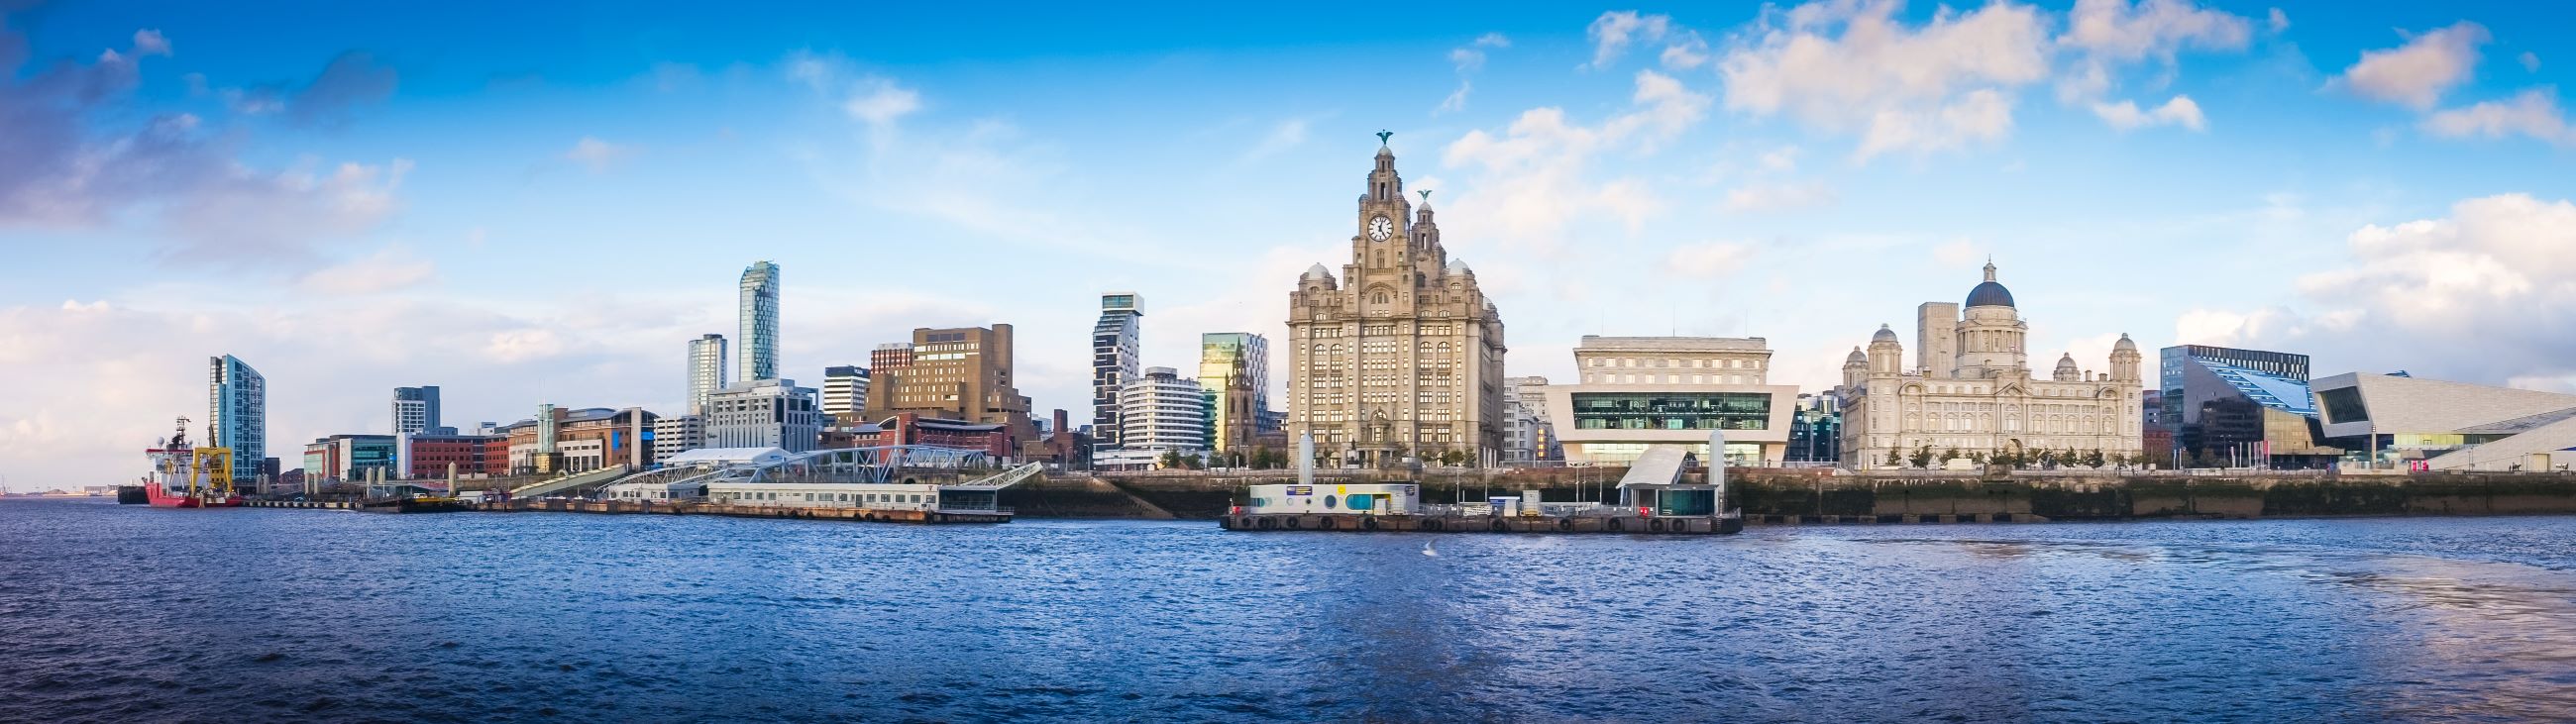 teaching assistant jobs in liverpool